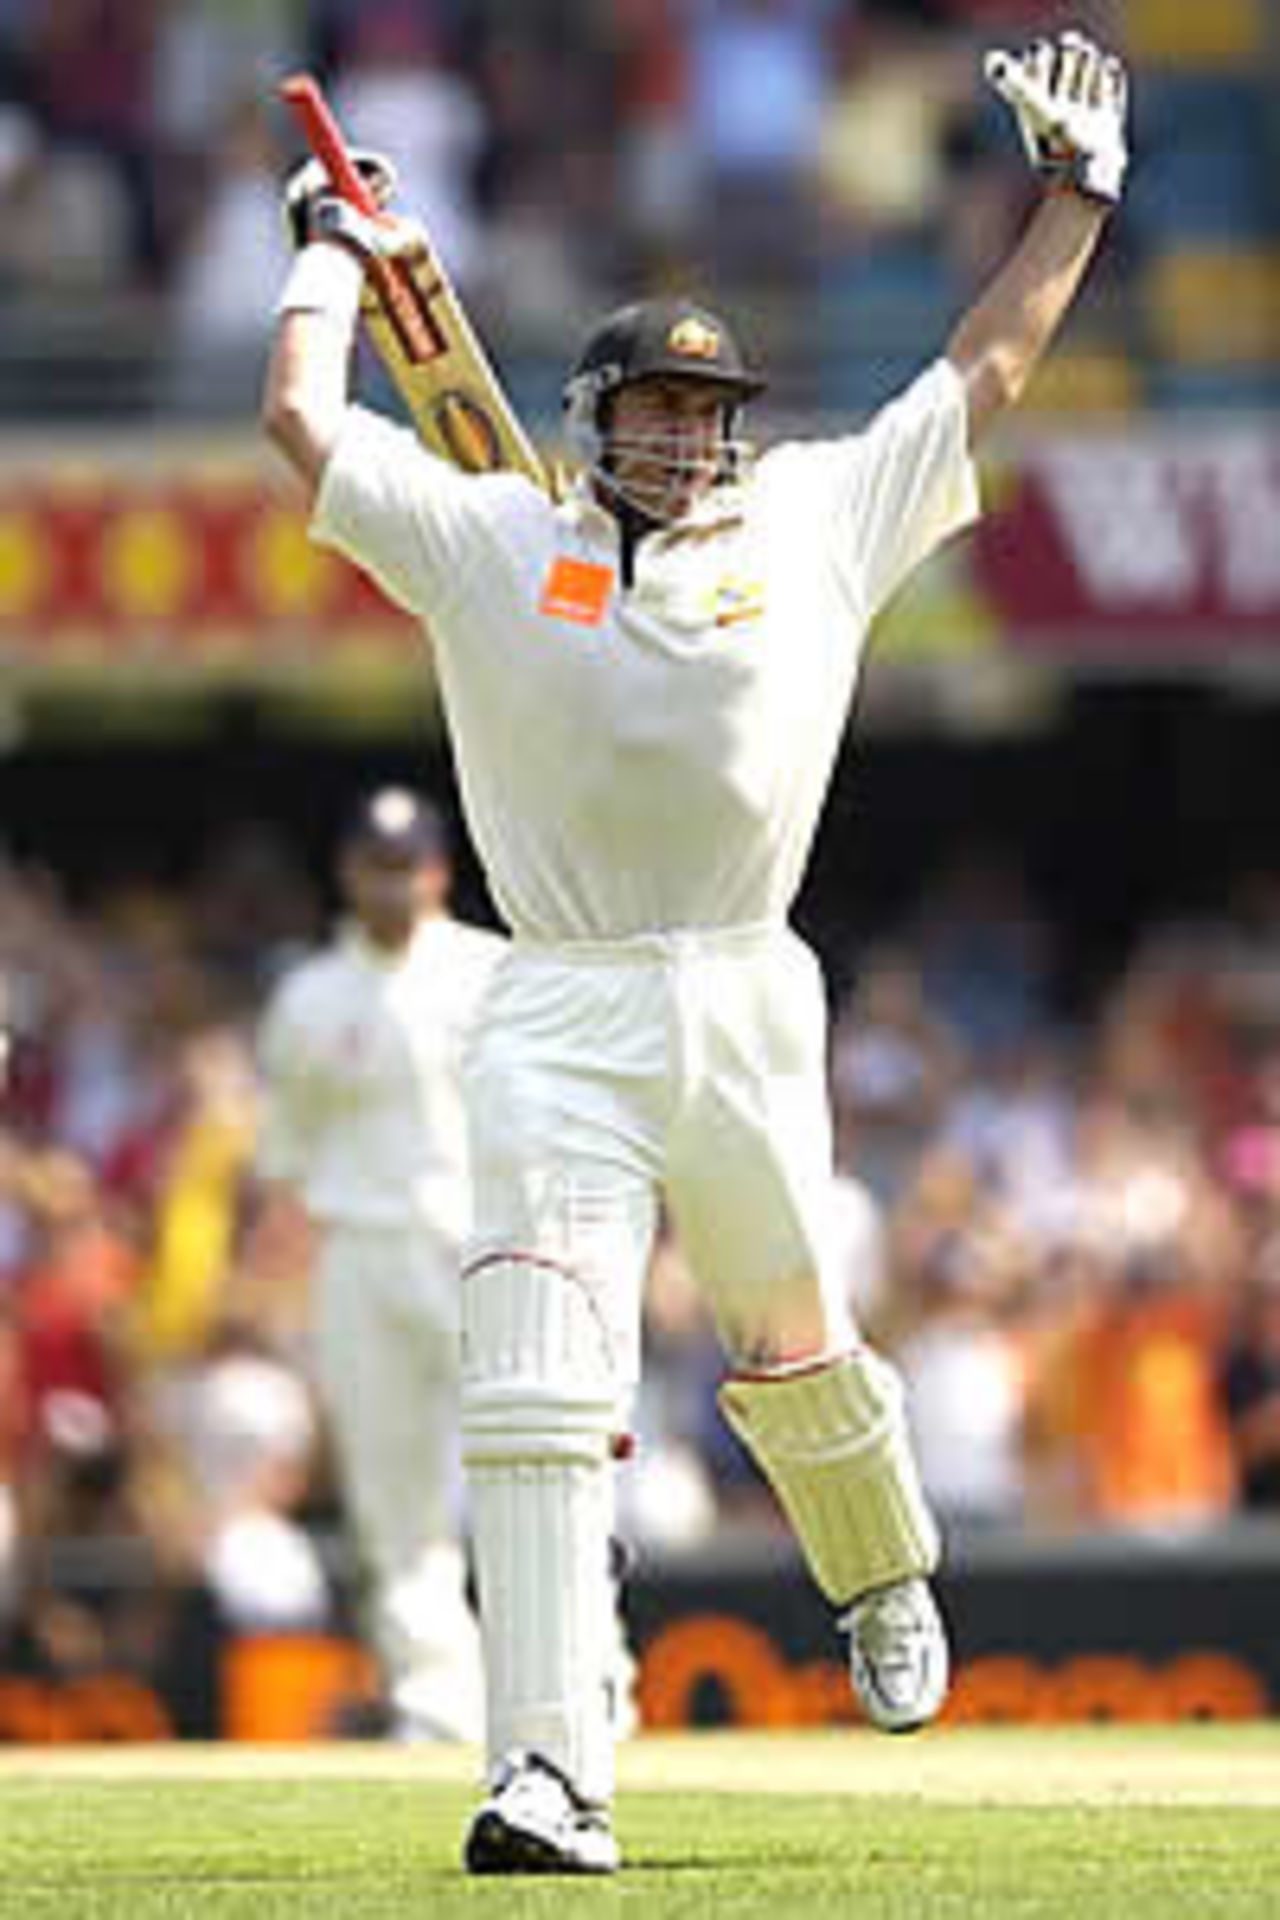 BRISBANE - NOVEMBER 7: Matthew Hayden of Australia celebrates reaching his century during day one of the first Ashes Test between Australia and England at the Gabba in Brisbane, Australia on November 7, 2002.